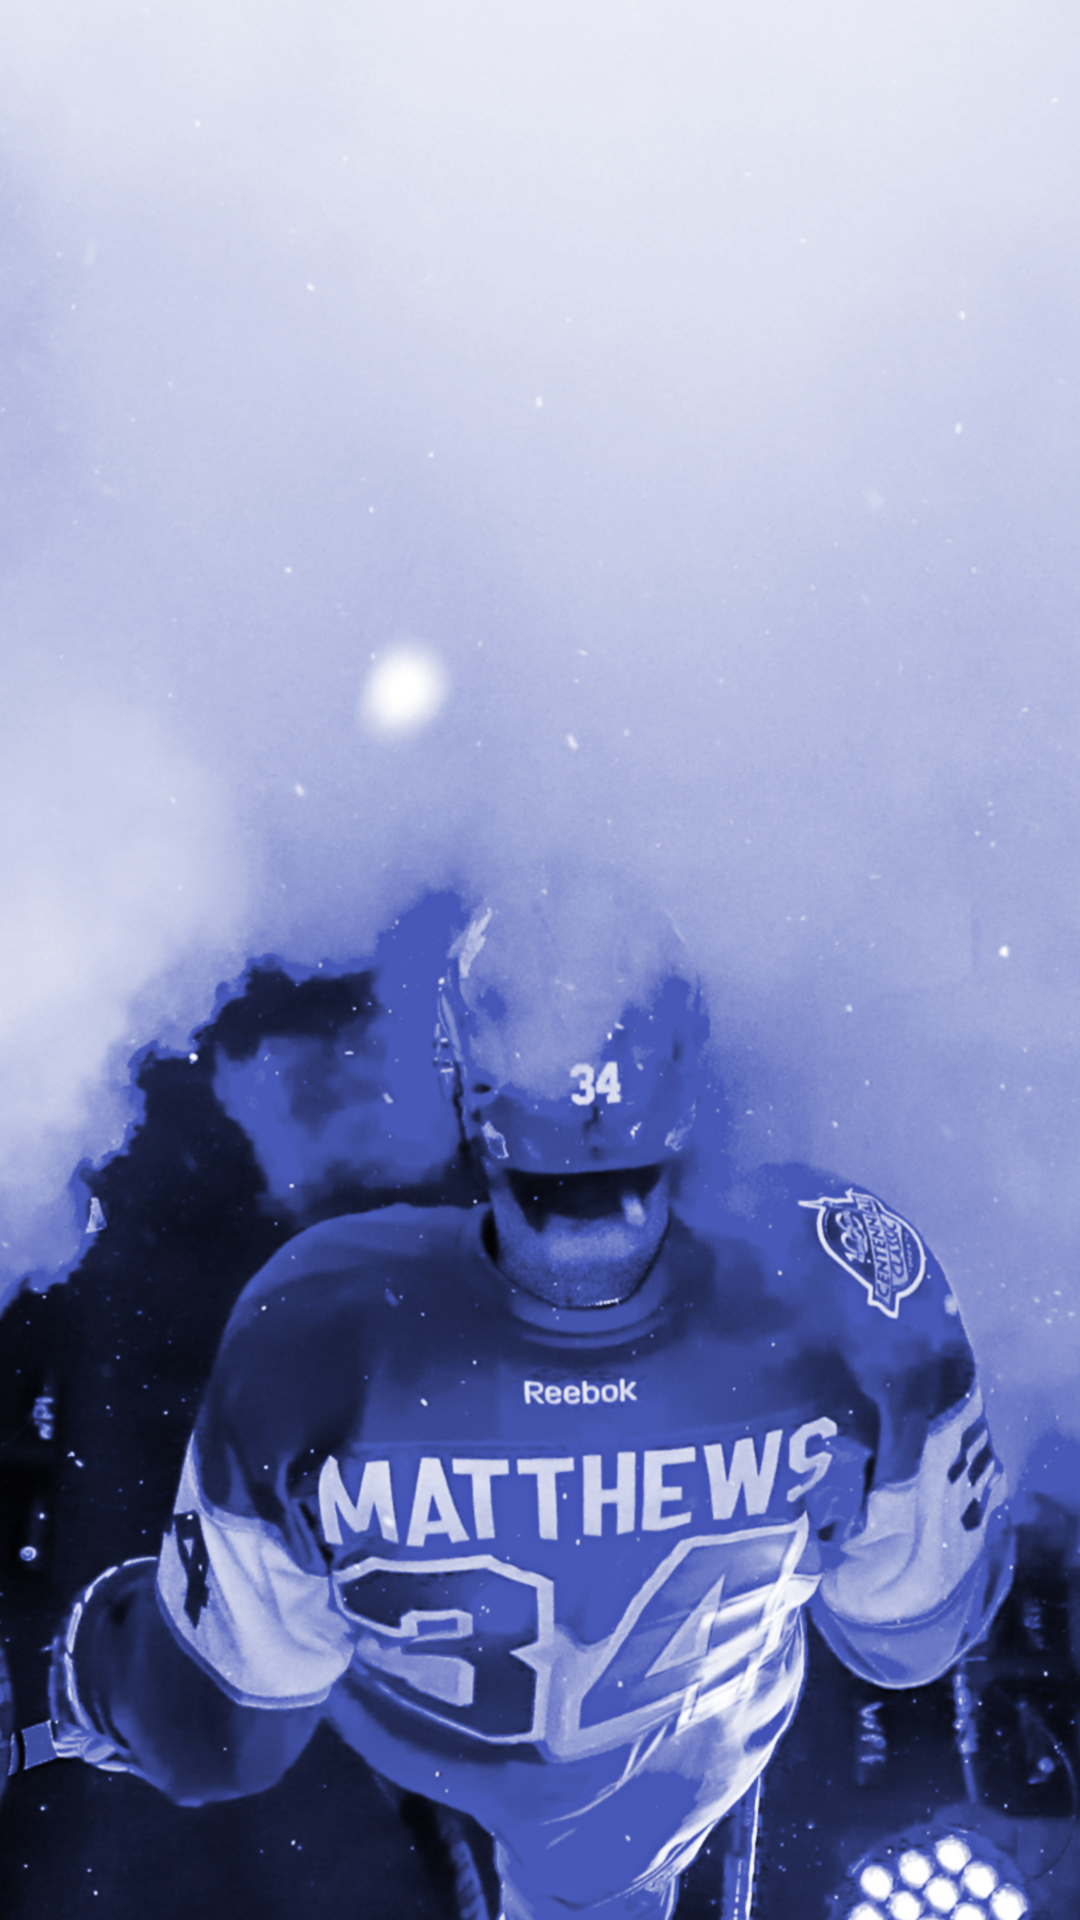 Leafs Wallpaper Nation